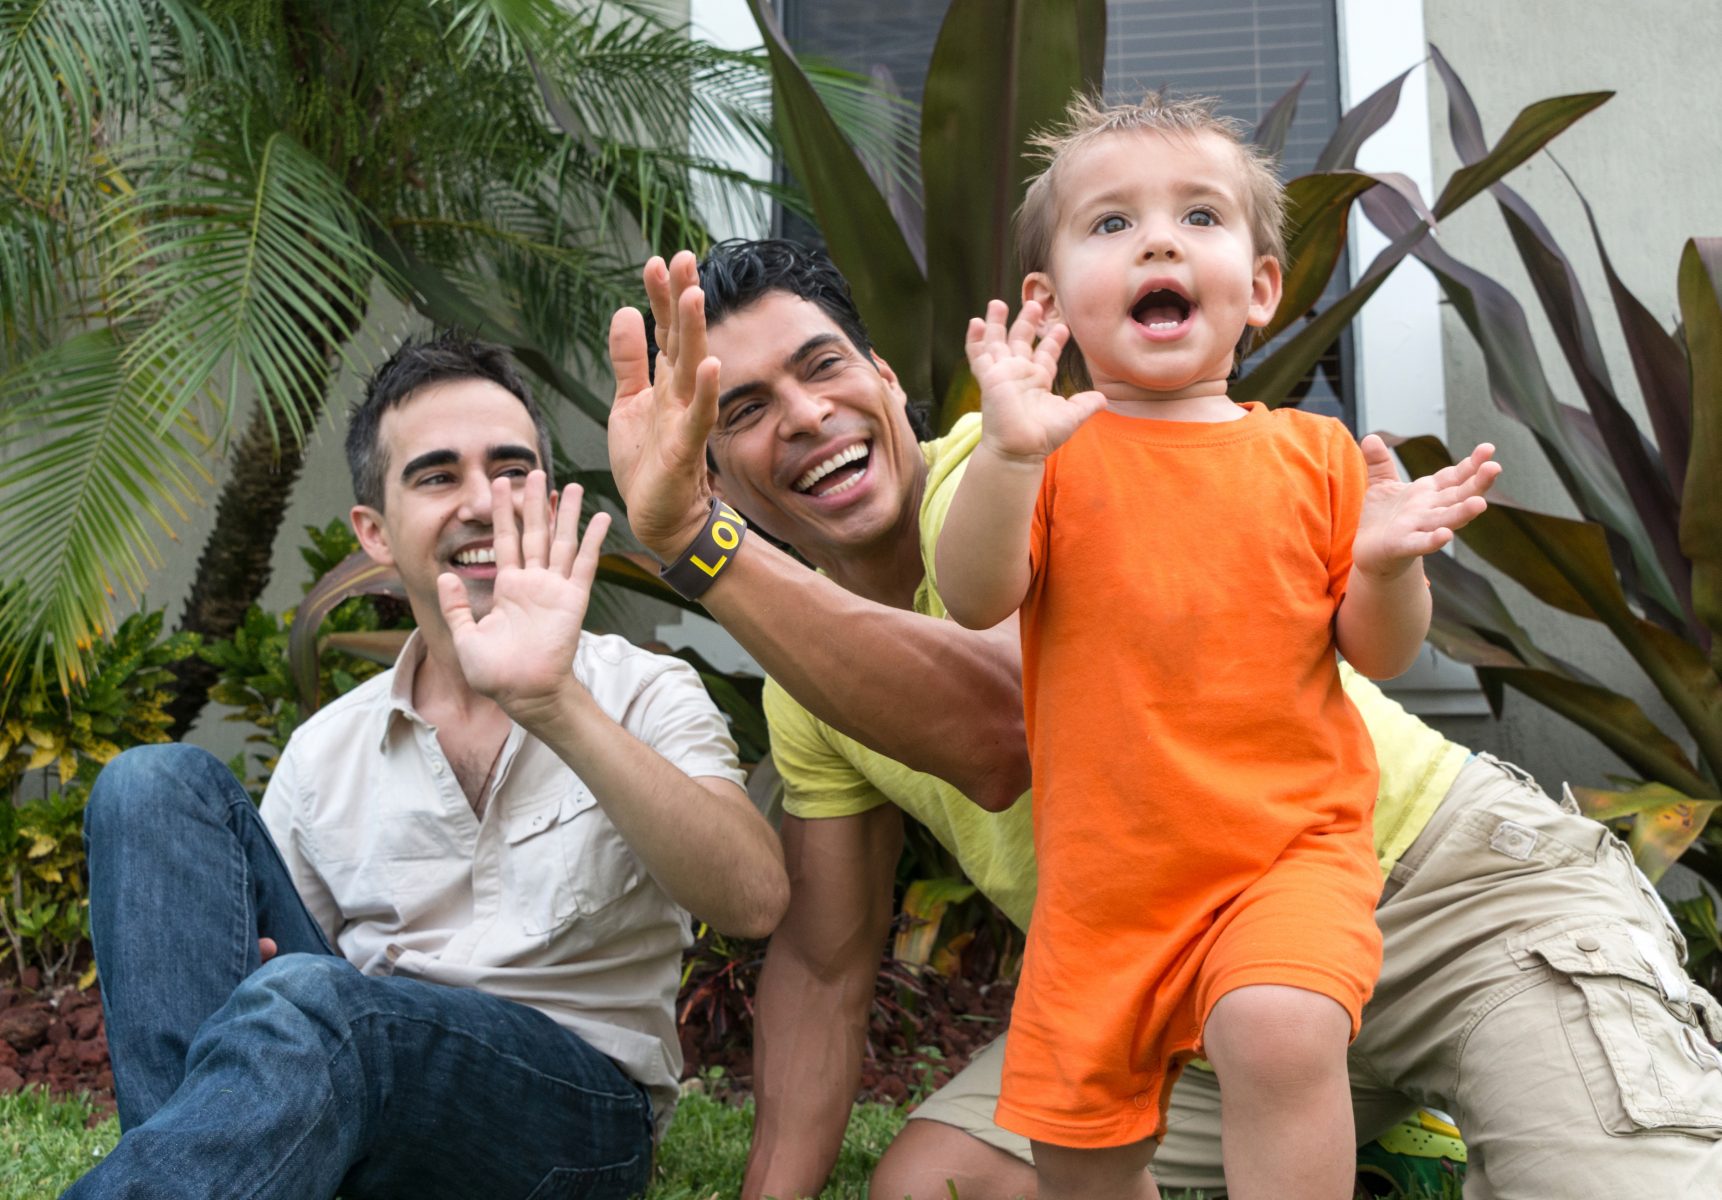 Like An Adoption Agency, Can Adoption Attorneys Kirsh & Kirsh, P.C. (“KIRSH & KIRSH”) Help Me Find A Same-Sex, Male Couple To Adopt, If I Give Up My Baby For Adoption In Indiana?